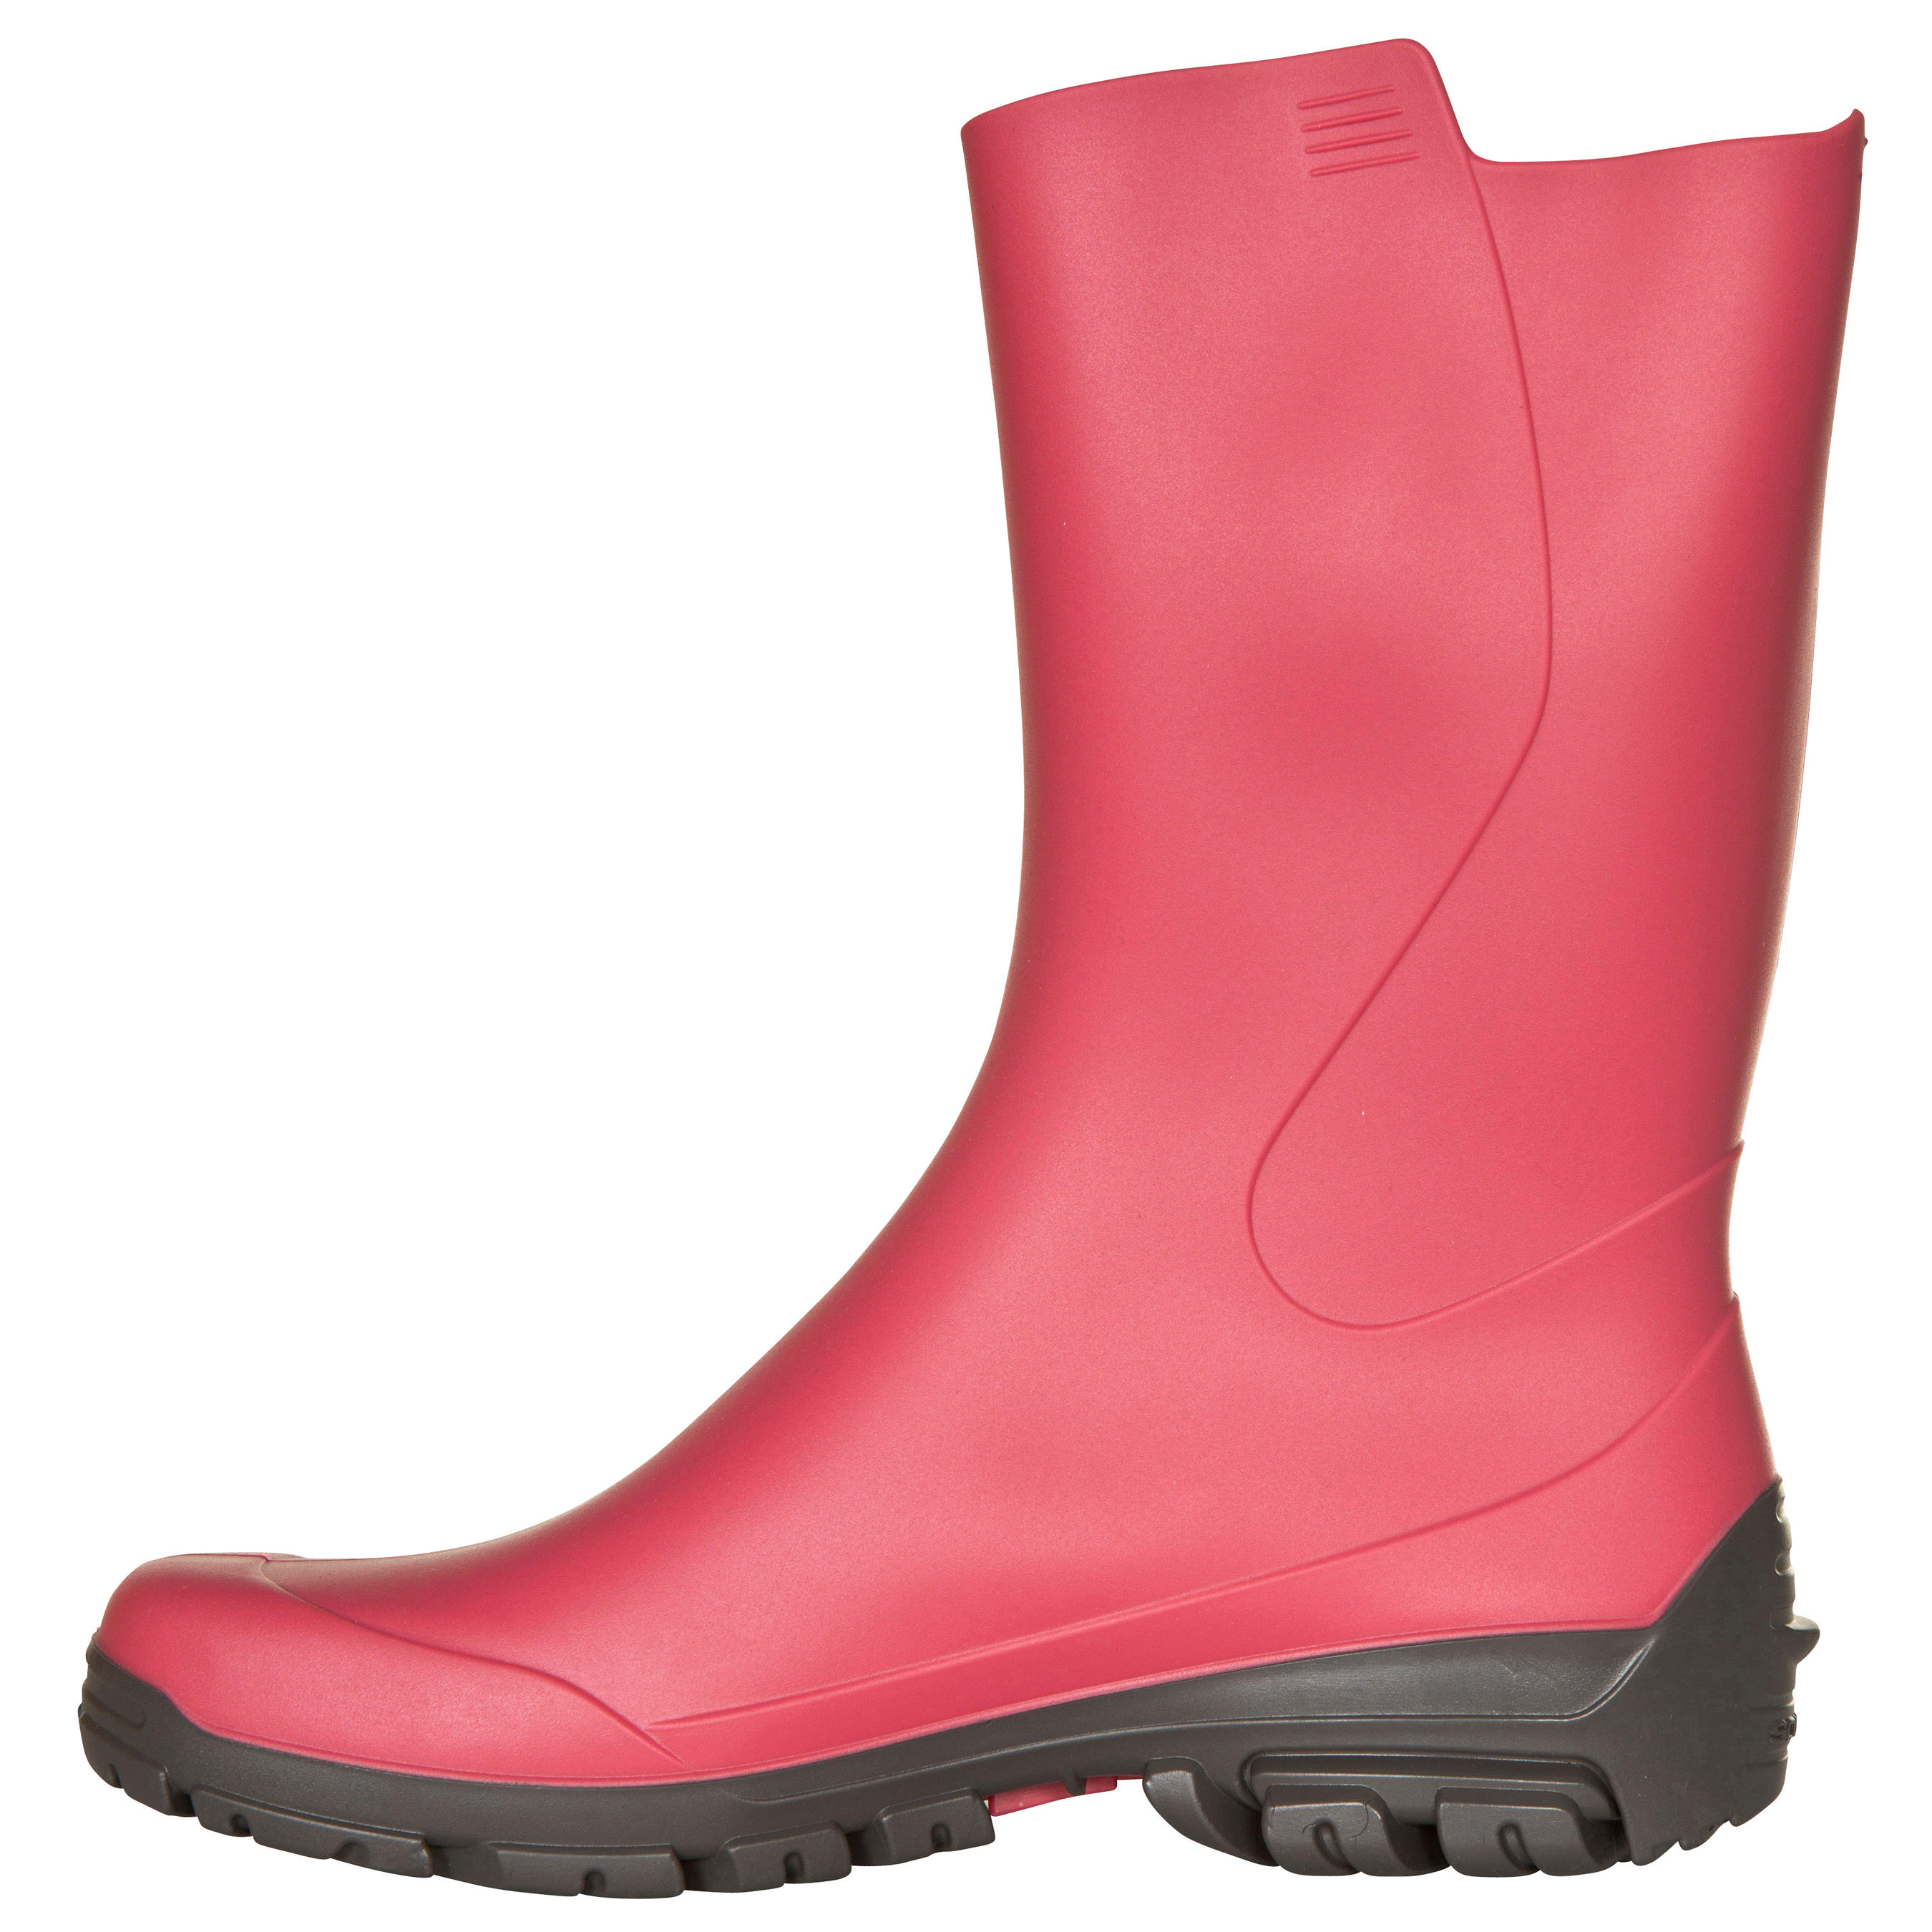 Inverness 100 Women's Ankle Boots - Pink 2/10